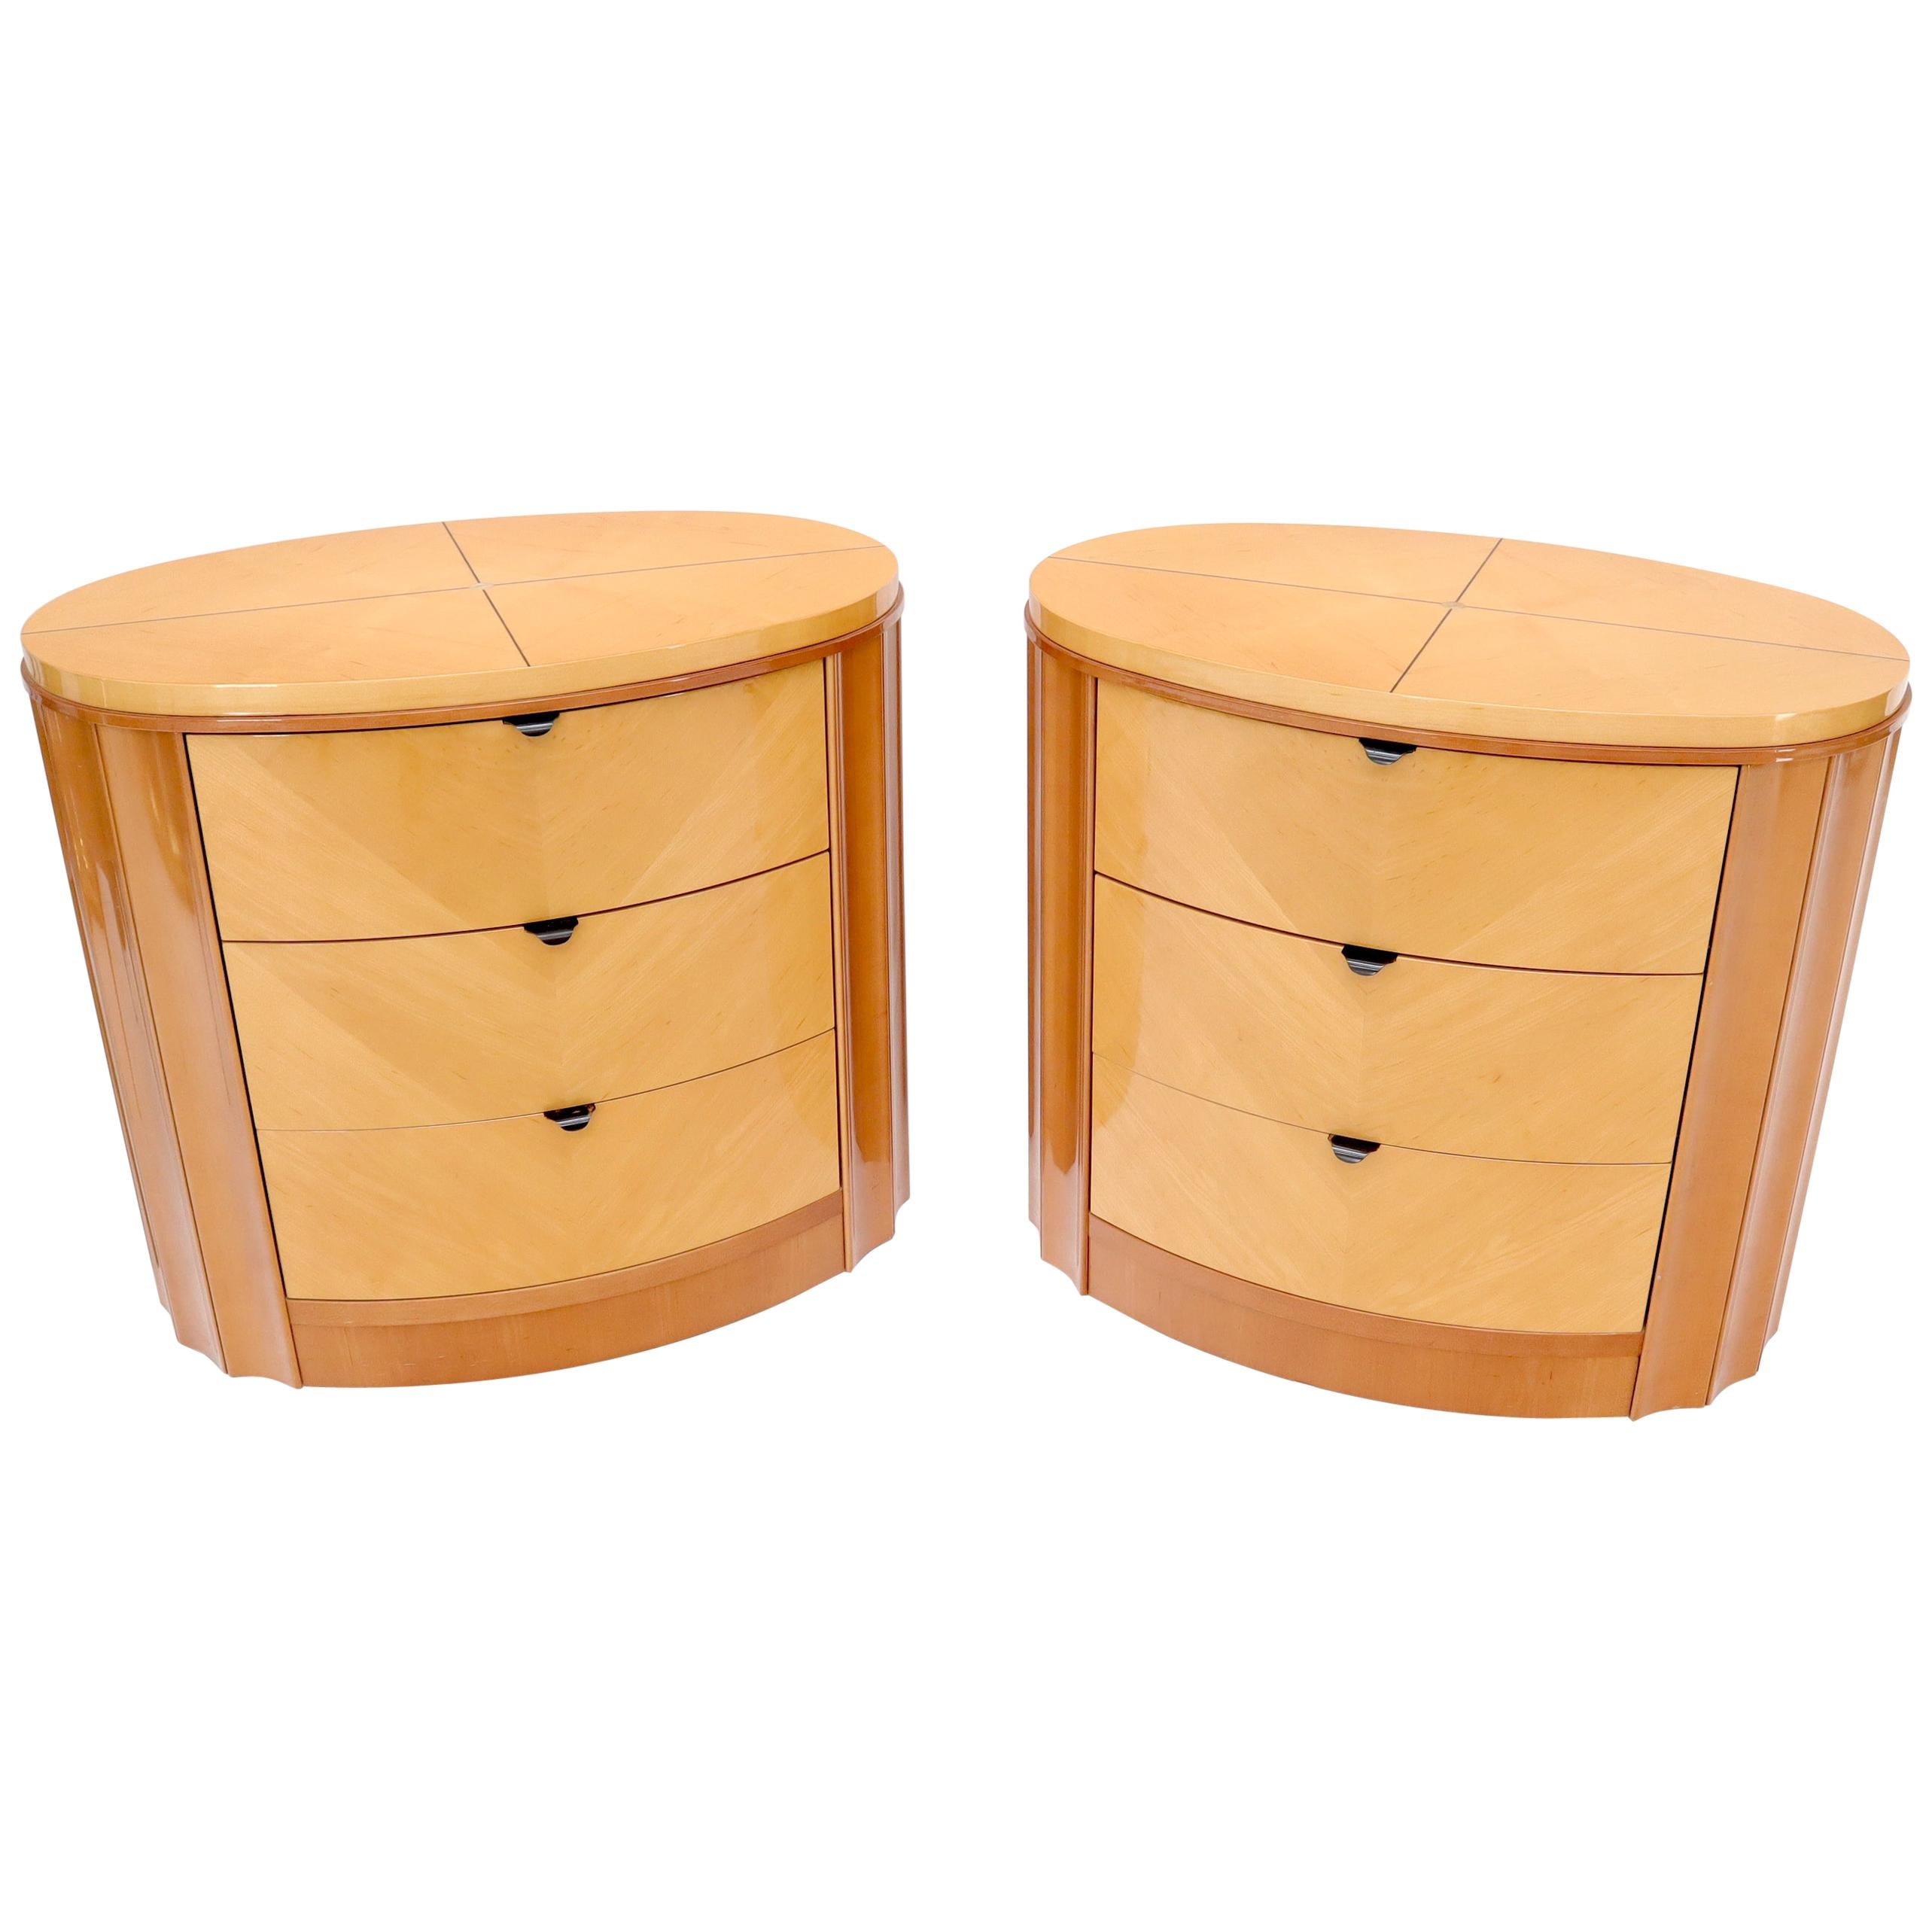 Pair of Oval Shape Scallop Sides Inlaid Top 3-Drawer Nightstands End Tables